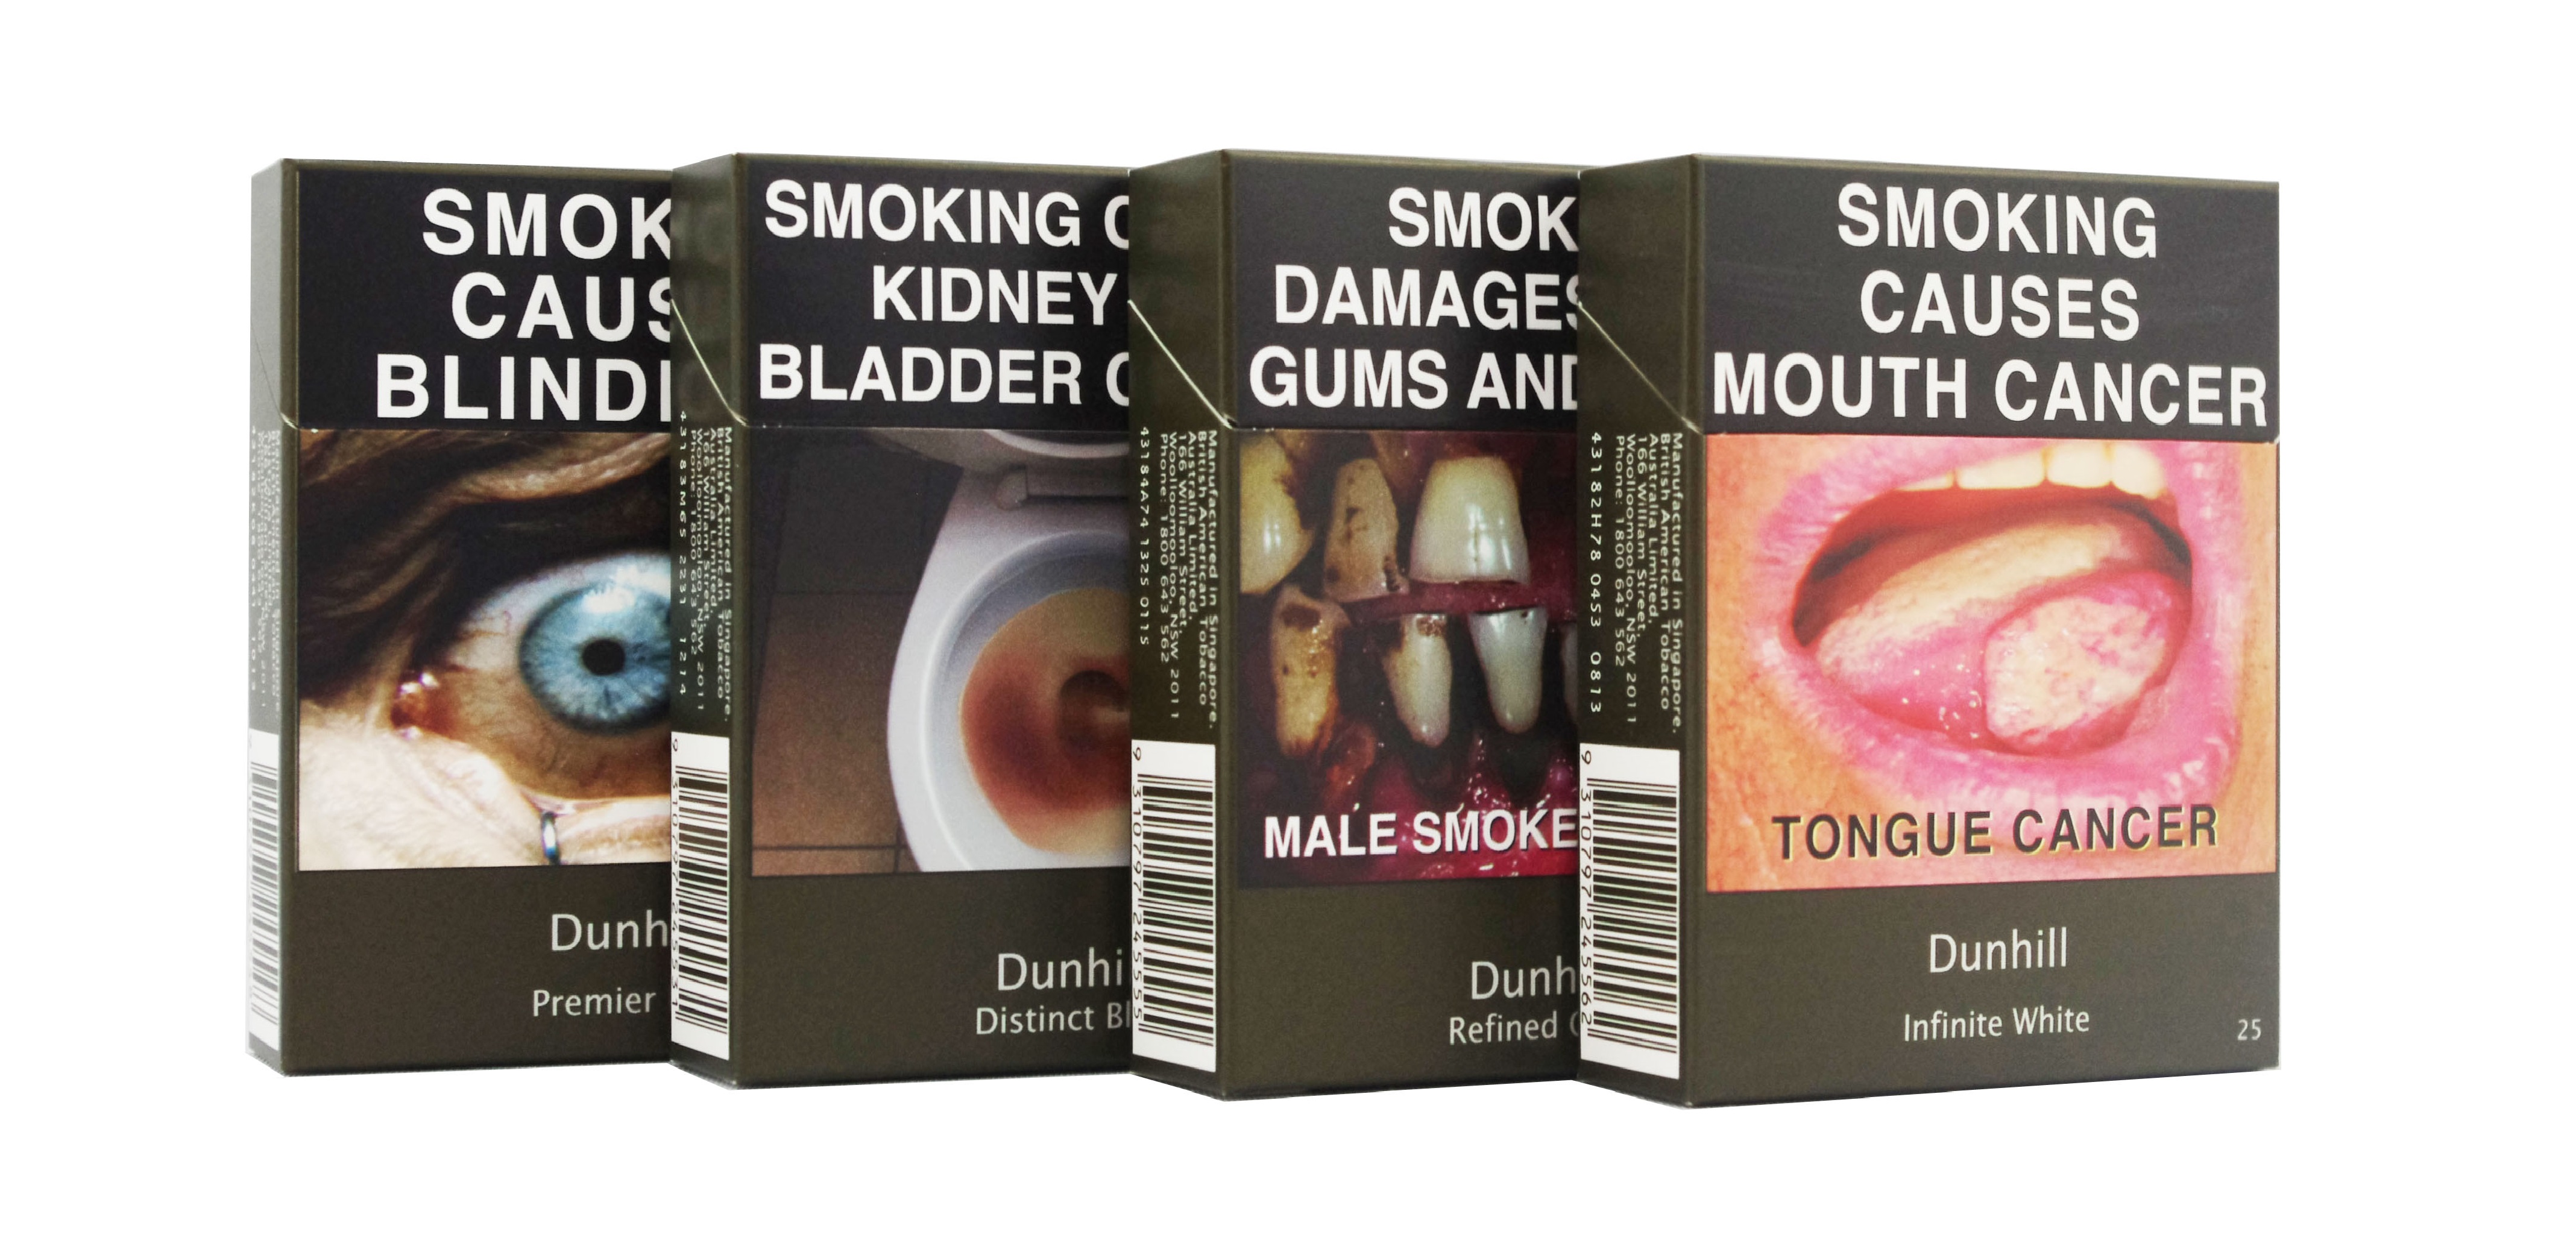 Packaging | Tobacco Labelling Regulations